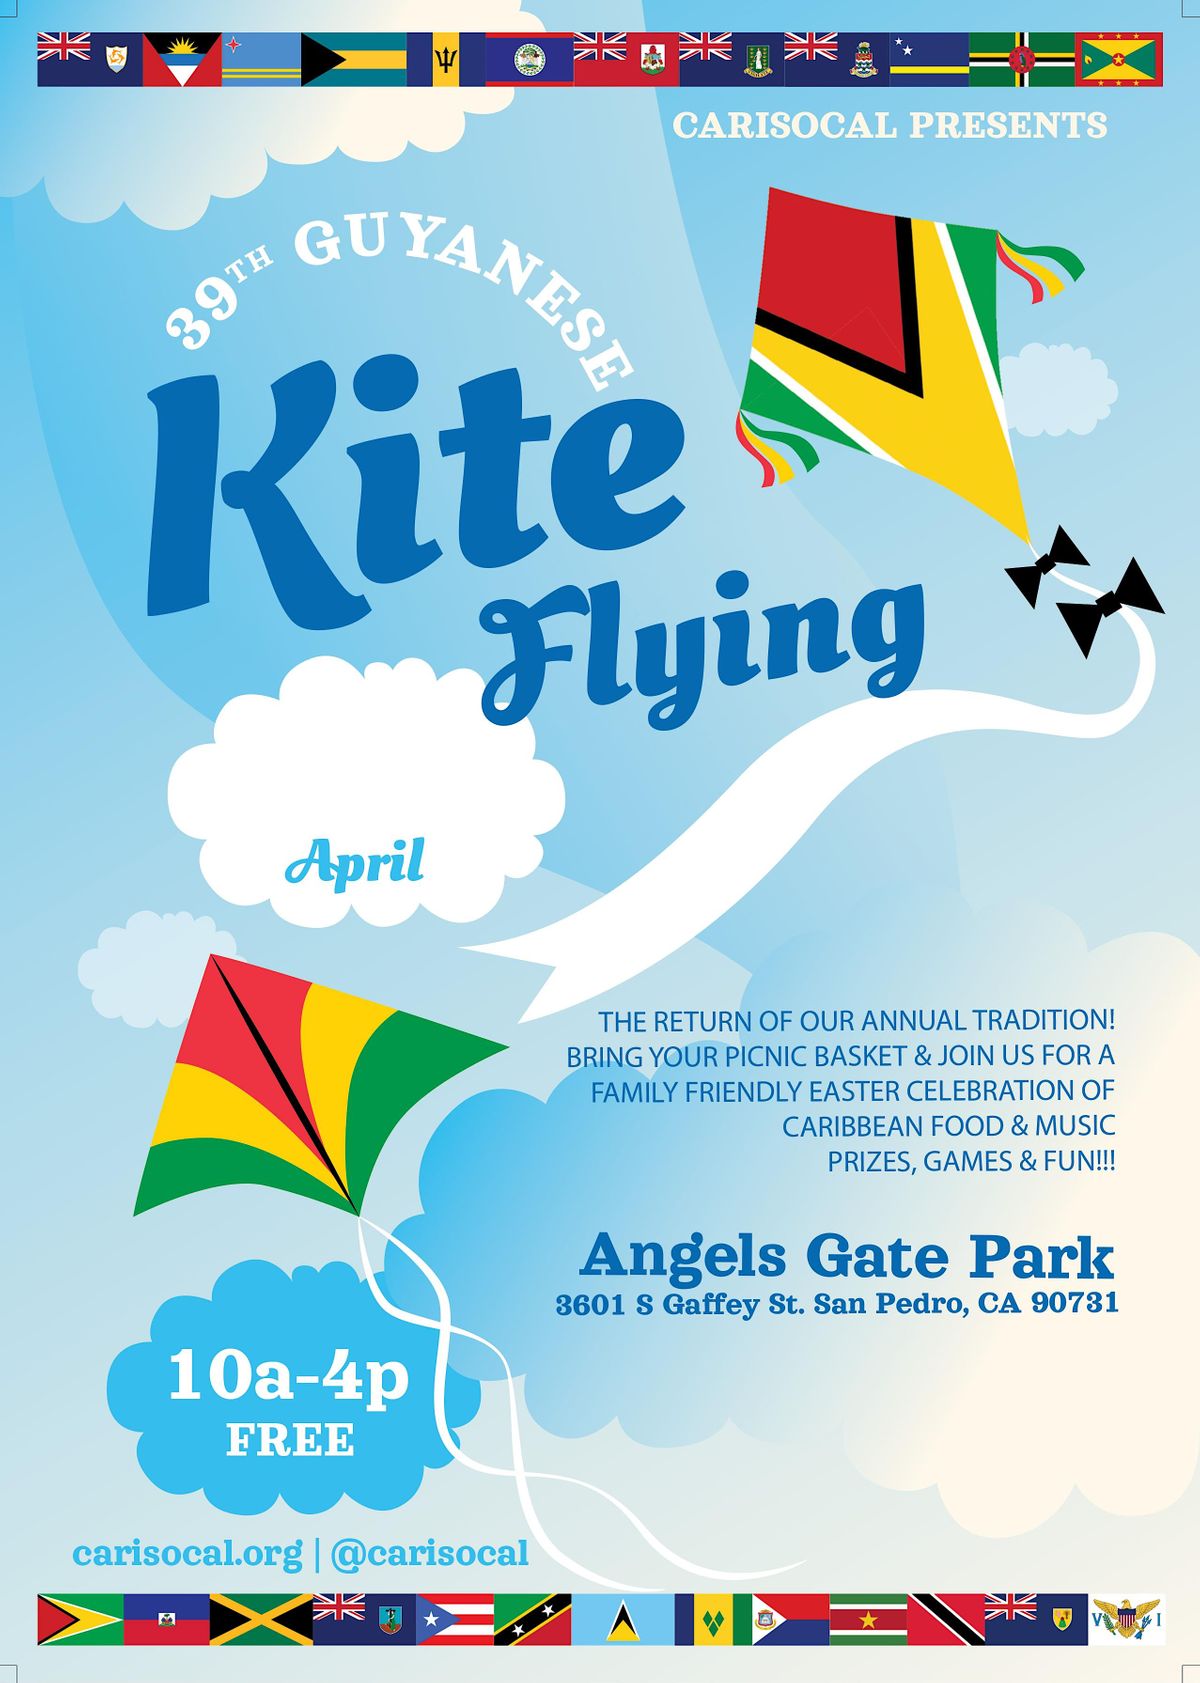 CariSoCal Presents: The 39th Annual Guyanese Kite Flying